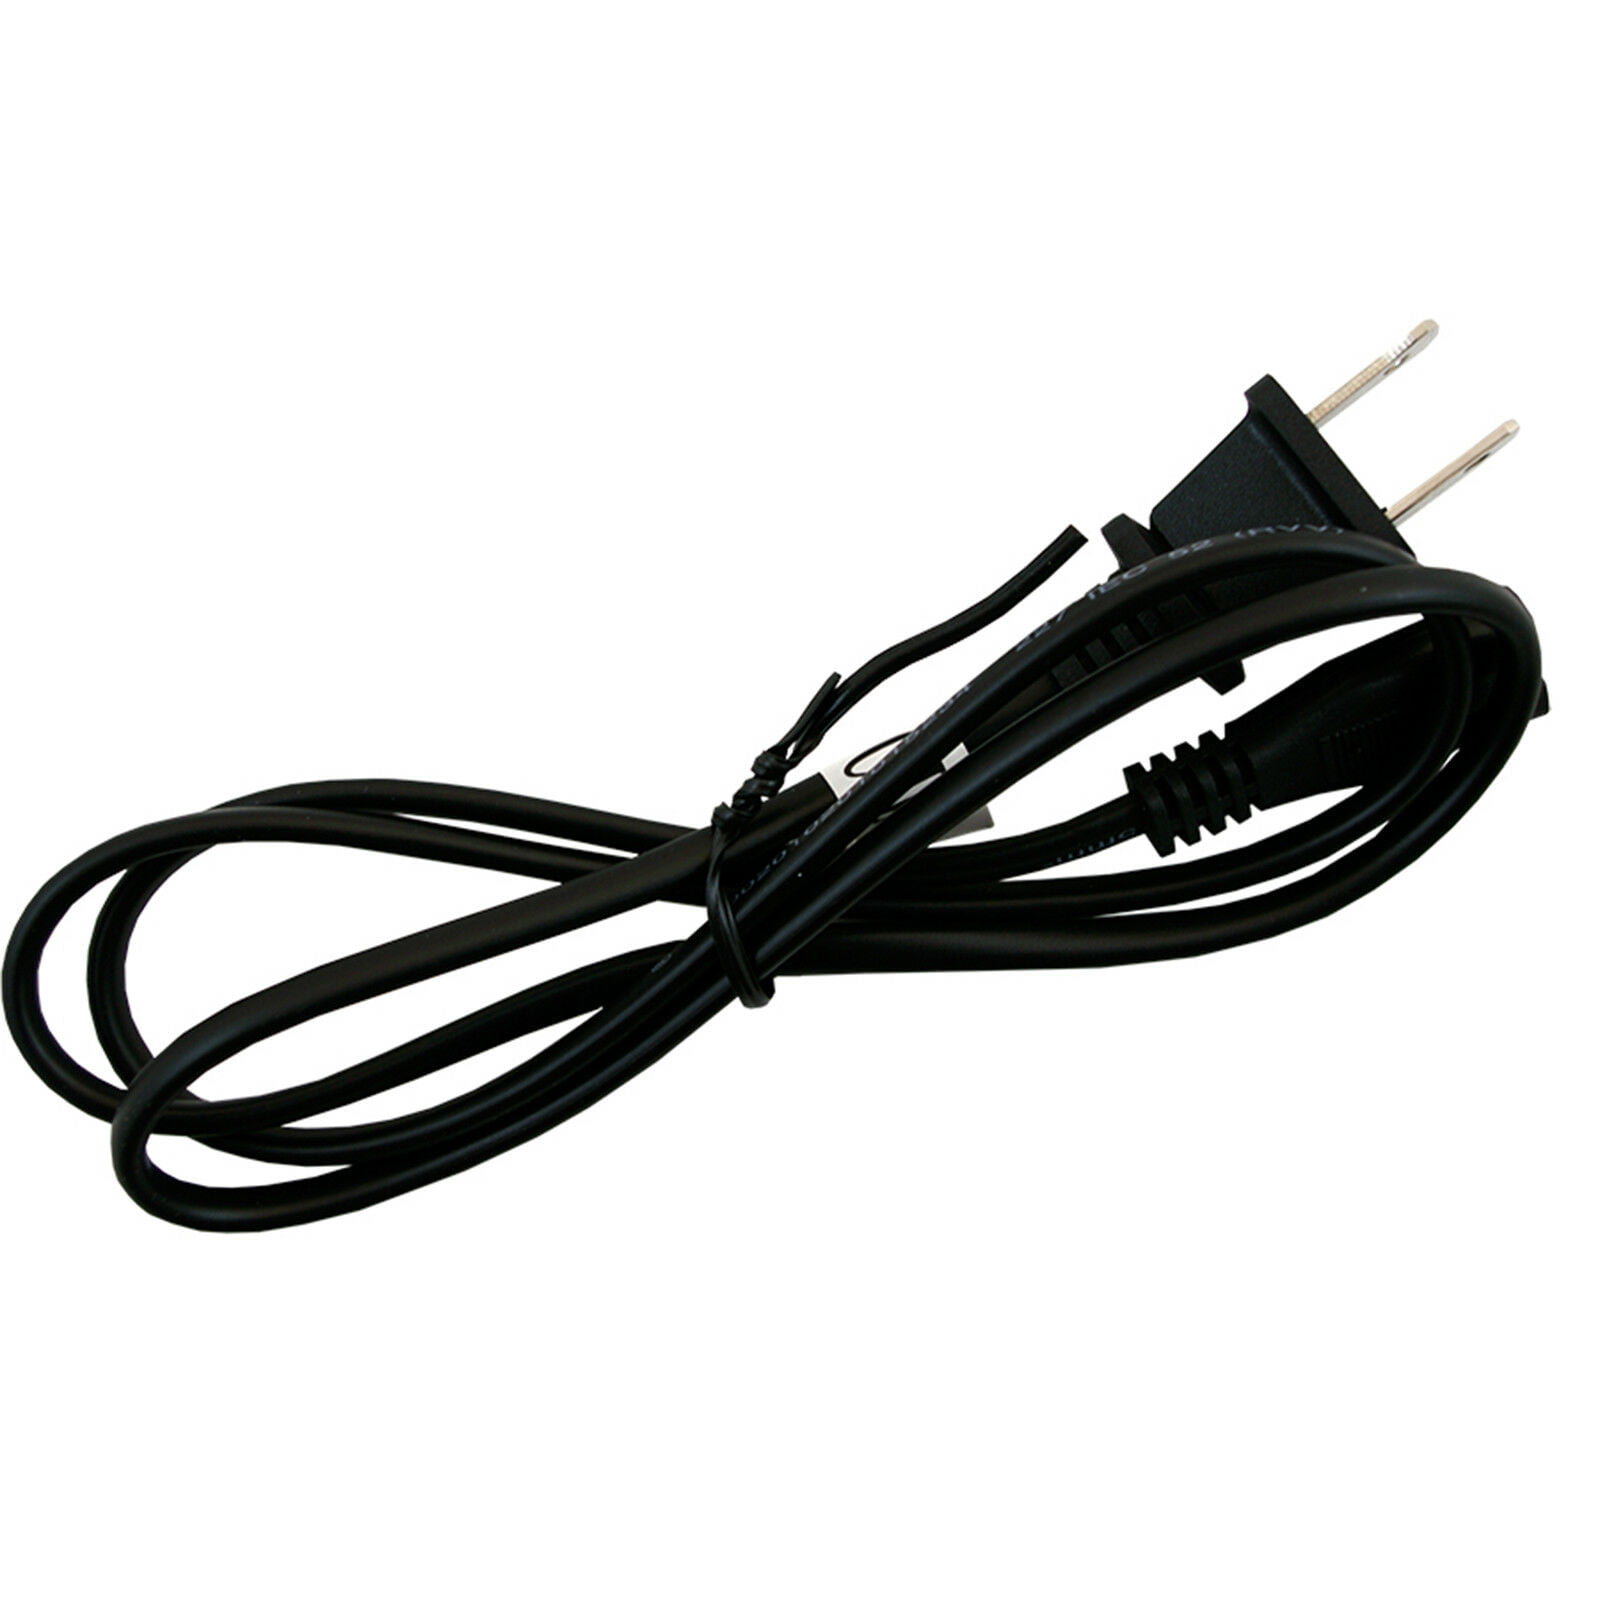 16AWG 24" 3pin Cuisinart Pressure Cooker Power Cord for CPC-SR600 CPC-600AMZ 